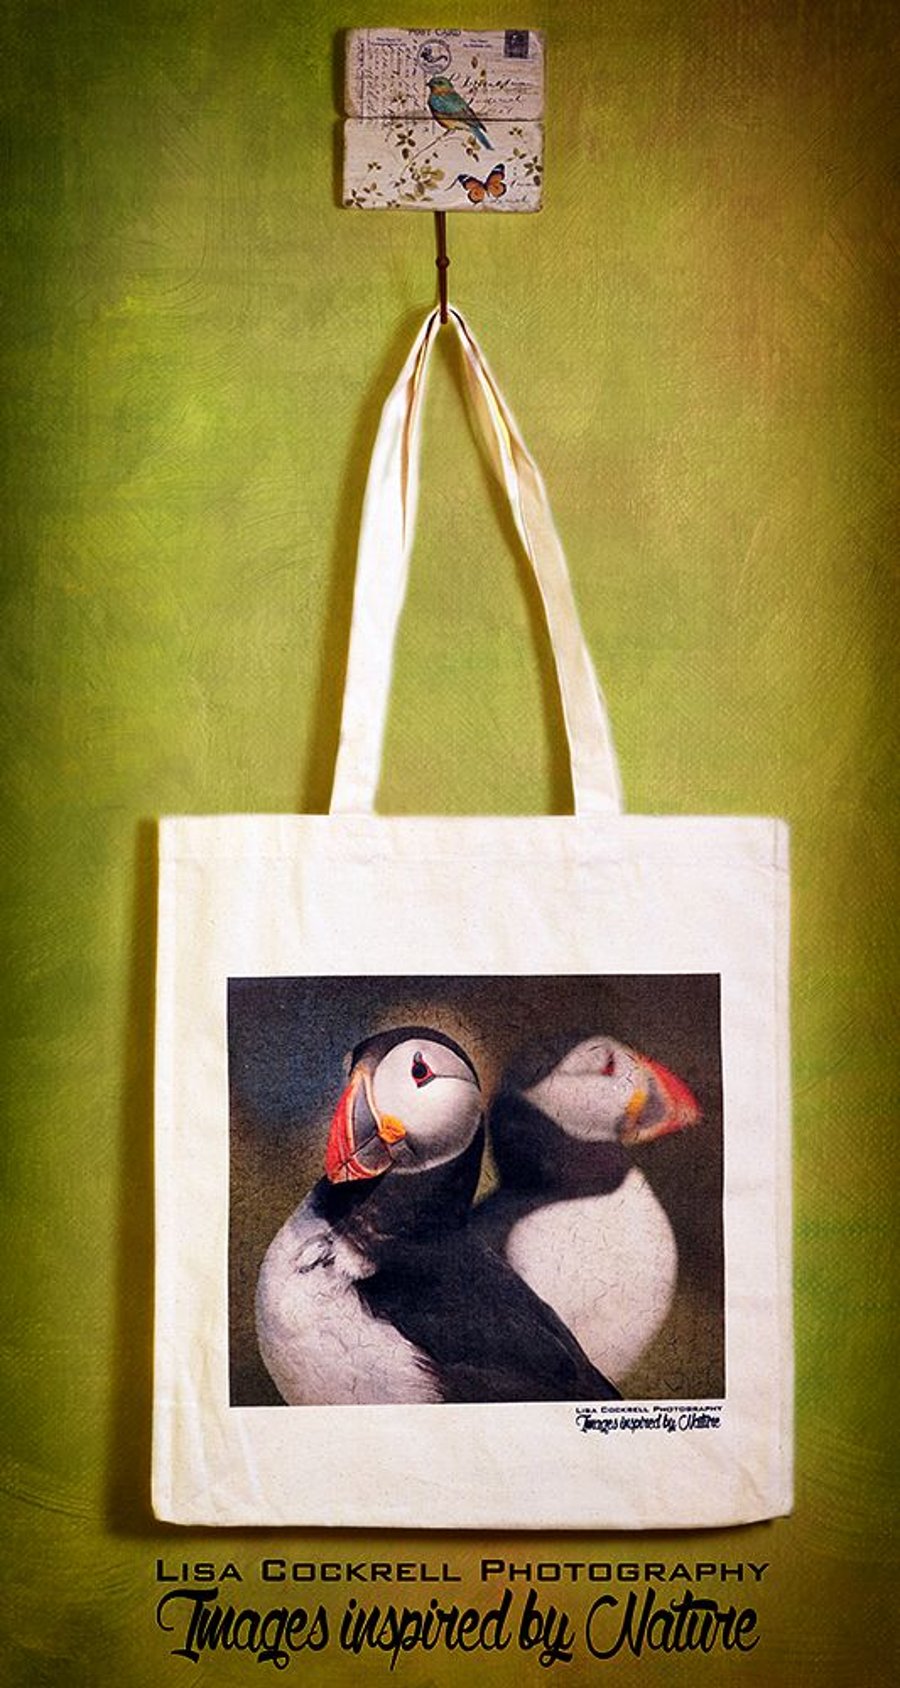 PUFFIN DOUBLES - TOTE BAGS INSPIRED BY NATURE FROM LISA COCKRELL PHOTOGRAPHY